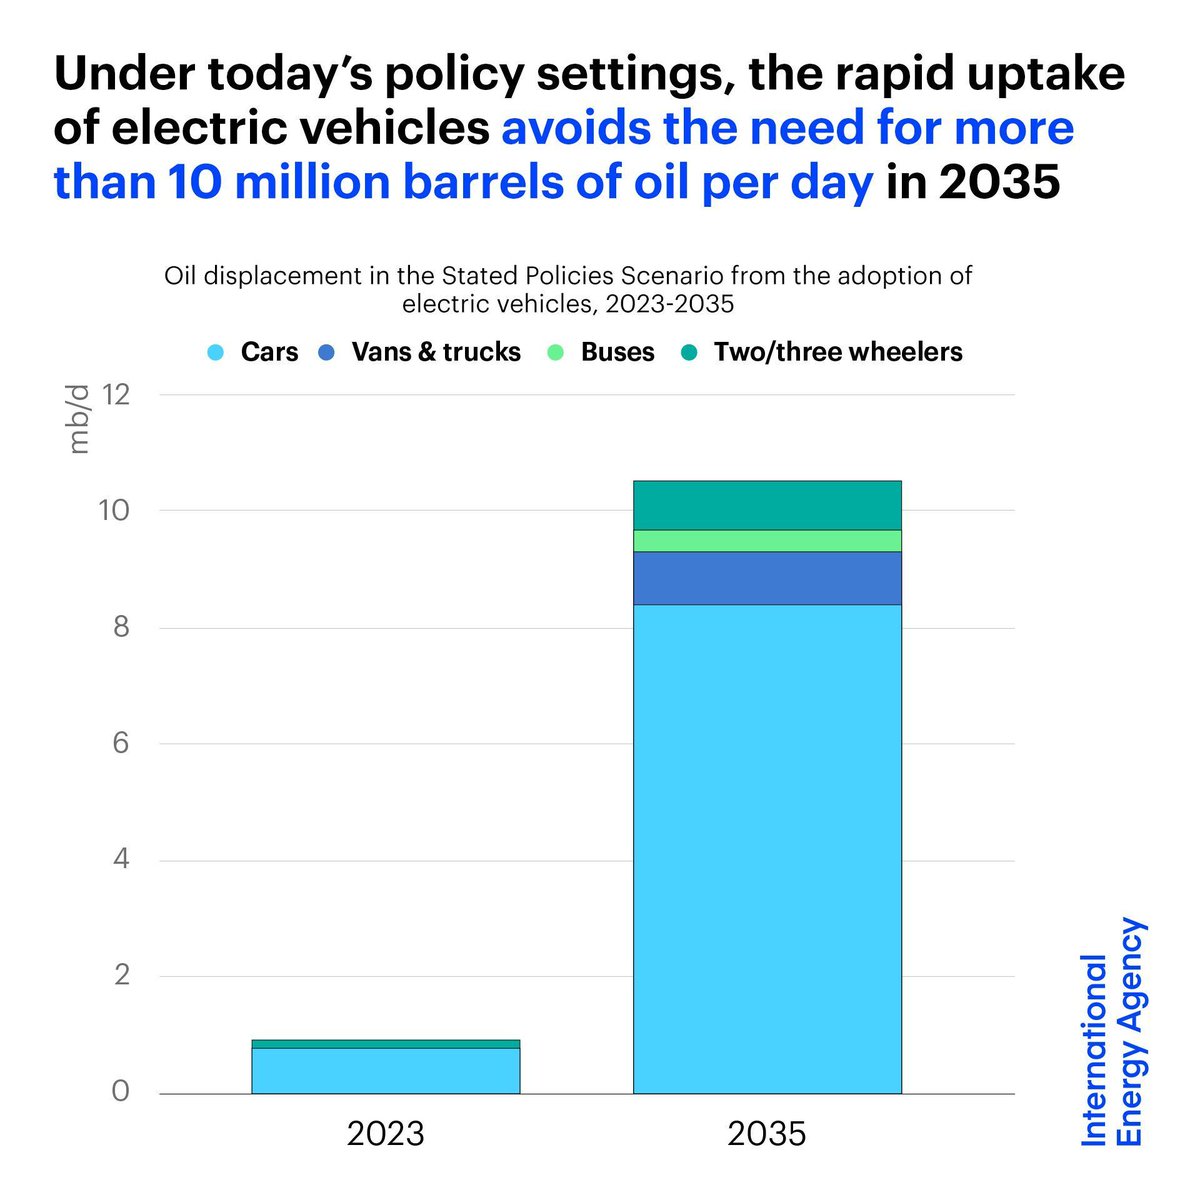 Under today’s policy settings, the uptake of EVs – including cars, vans, trucks, buses & 2/3-wheelers – is set to avoid the need for over 10 million barrels of oil a day in 2035 That's equal to all the oil demand from road transport in the US today 👉 iea.li/3VcosB4